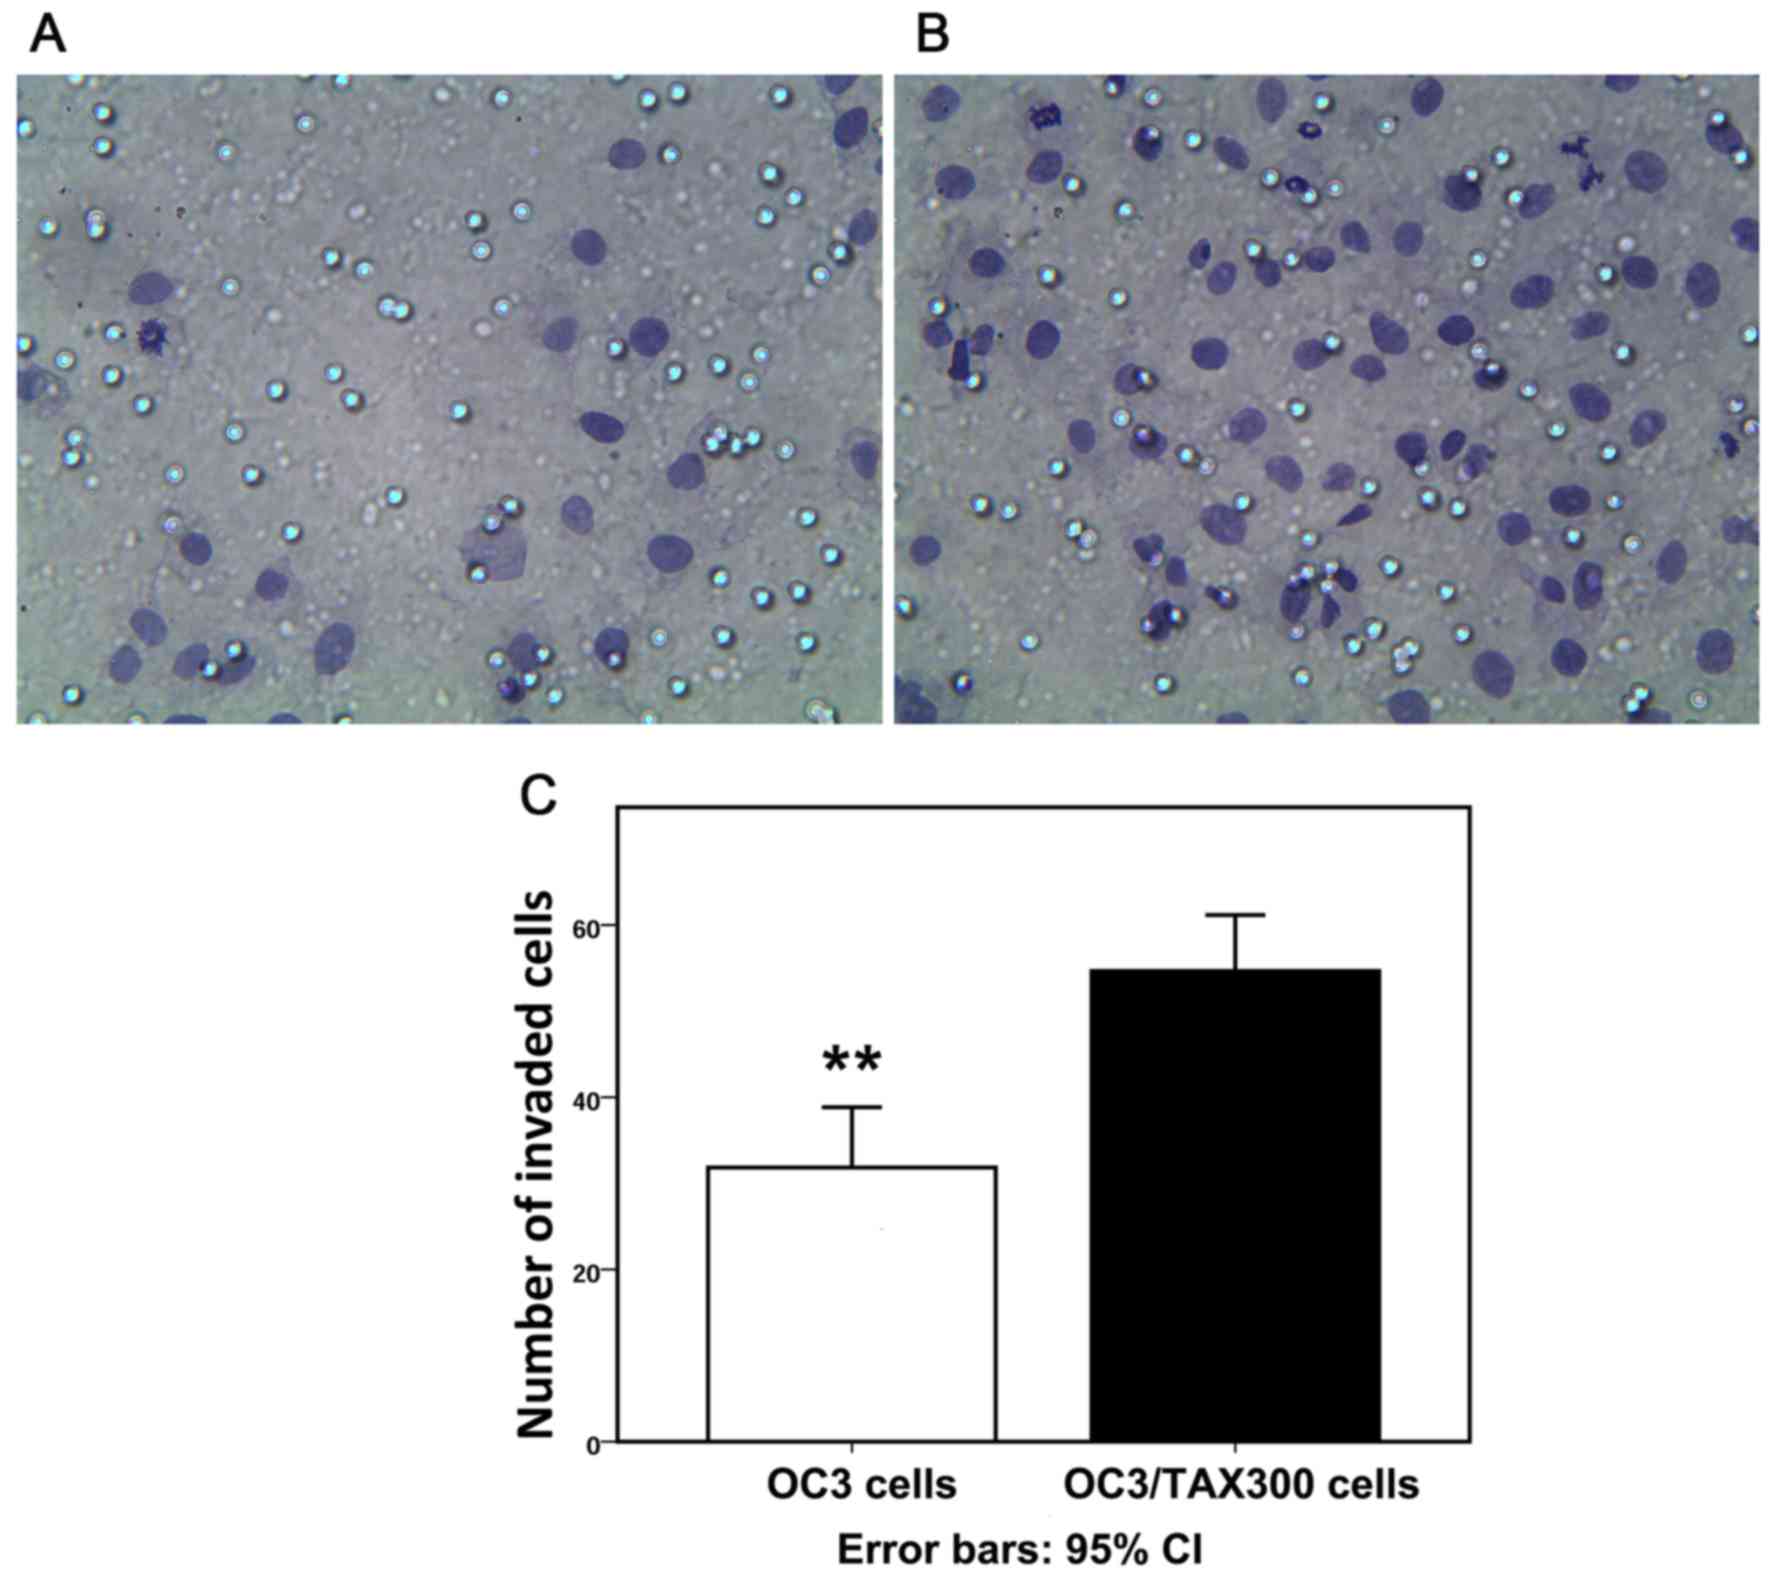 Human epithelial ovarian cancer cells expressing CD105, CD44 and 